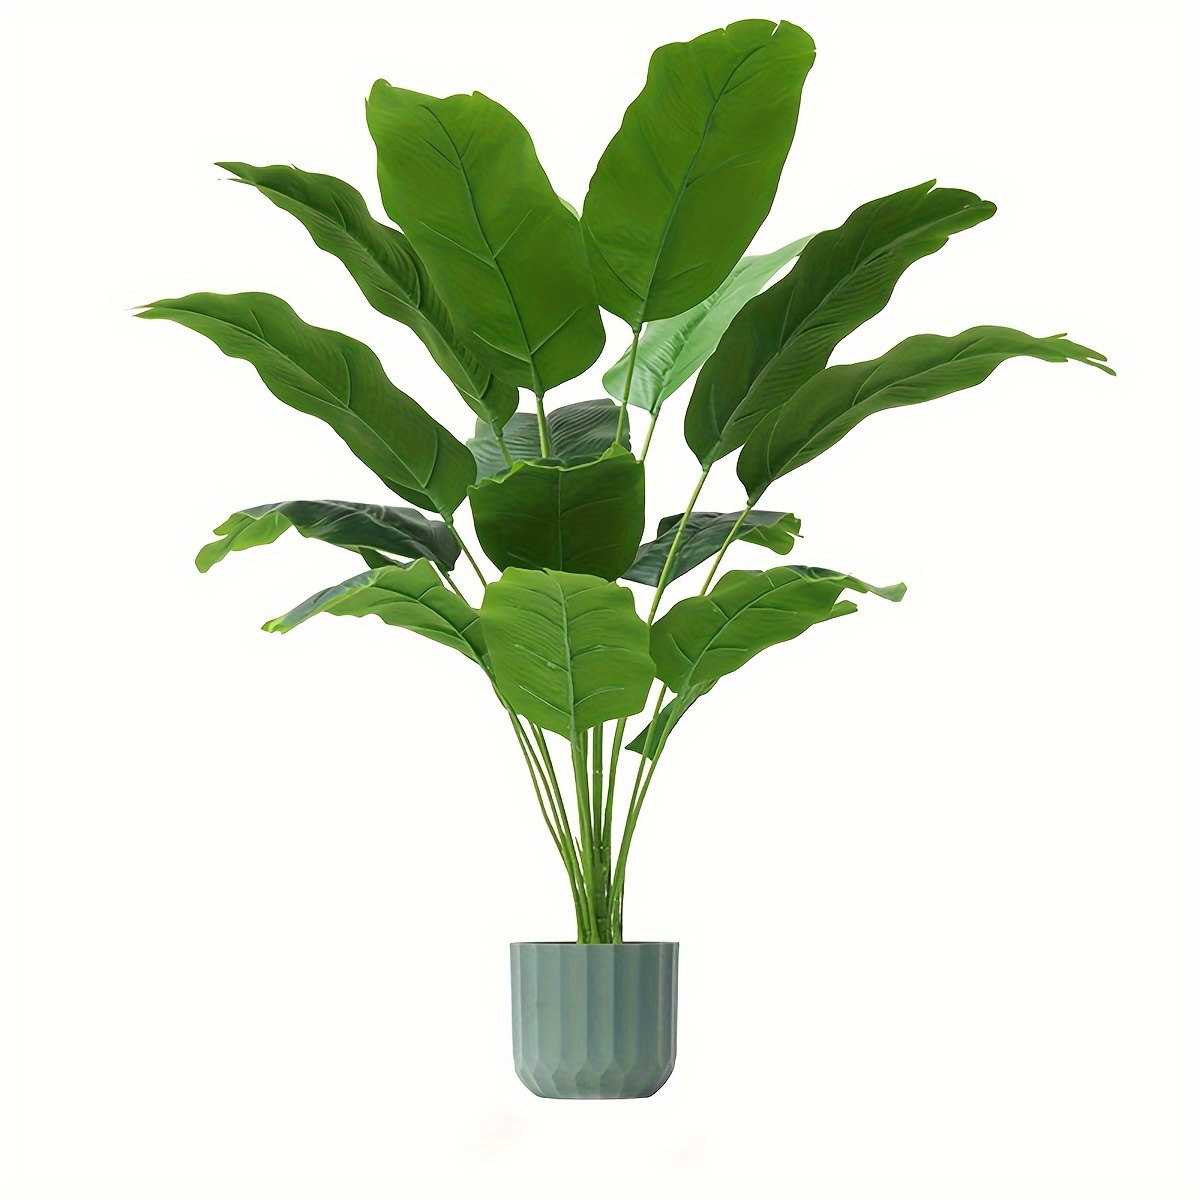 

Tropical Artificial Banana Leaf - 18 Heads Realistic Fake Large Plant For Home, Wedding, Office Decor - Summer Beach Theme Plastic Greenery - Fits Multiple Room Types - 1pc